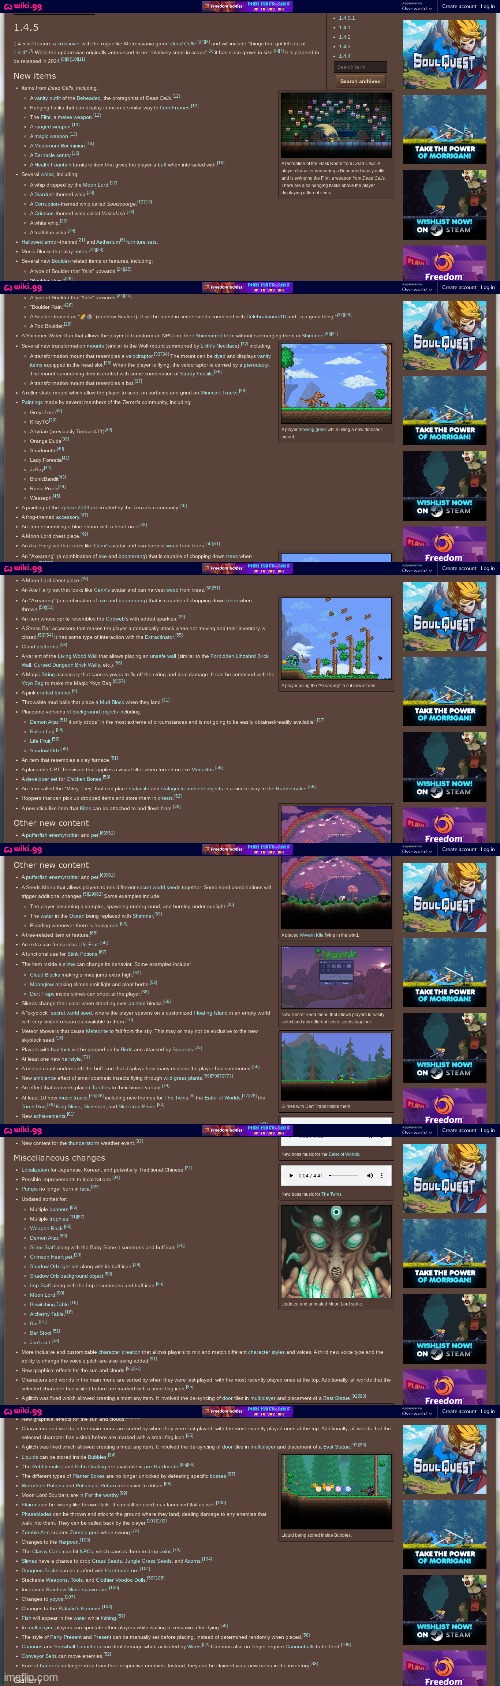 Future changes/features coming to Terraria 1.4.5 (So you don't miss out!!) | image tagged in terraria,video games,official wiki,terraria forums,announcement,updates | made w/ Imgflip meme maker